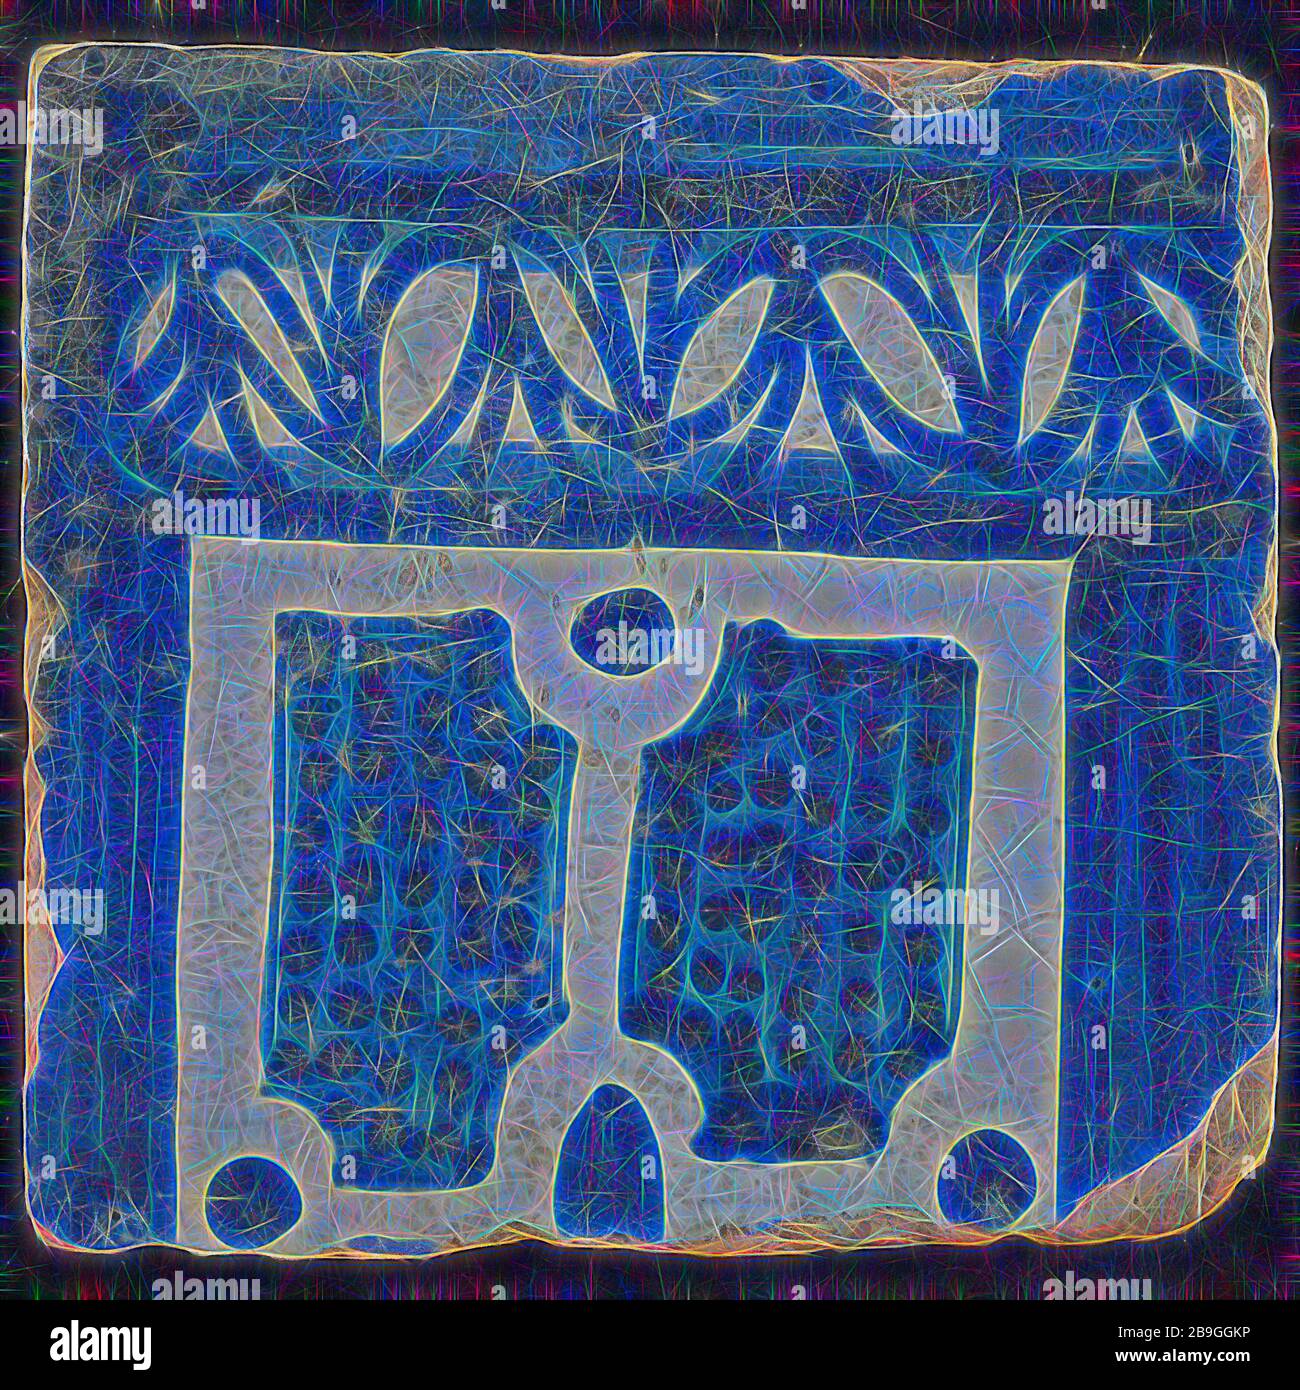 Tile of chimney pilaster, blue on white, bottom of column with basement with leaf motif, compartment with dots, chimney pilaster tile pellet image fragment ceramic earthenware glaze, baked 2x glazed painted Tile part of chimney pilaster originally twelve or thirteen high Rony shard square two nail holes. Blue on white fond. Tile forms part of single-row pilaster in Renaissance style and shows the underside of column with division with dark blue dots on the blue background. on Rotterdam in May 1940 Stock Photo